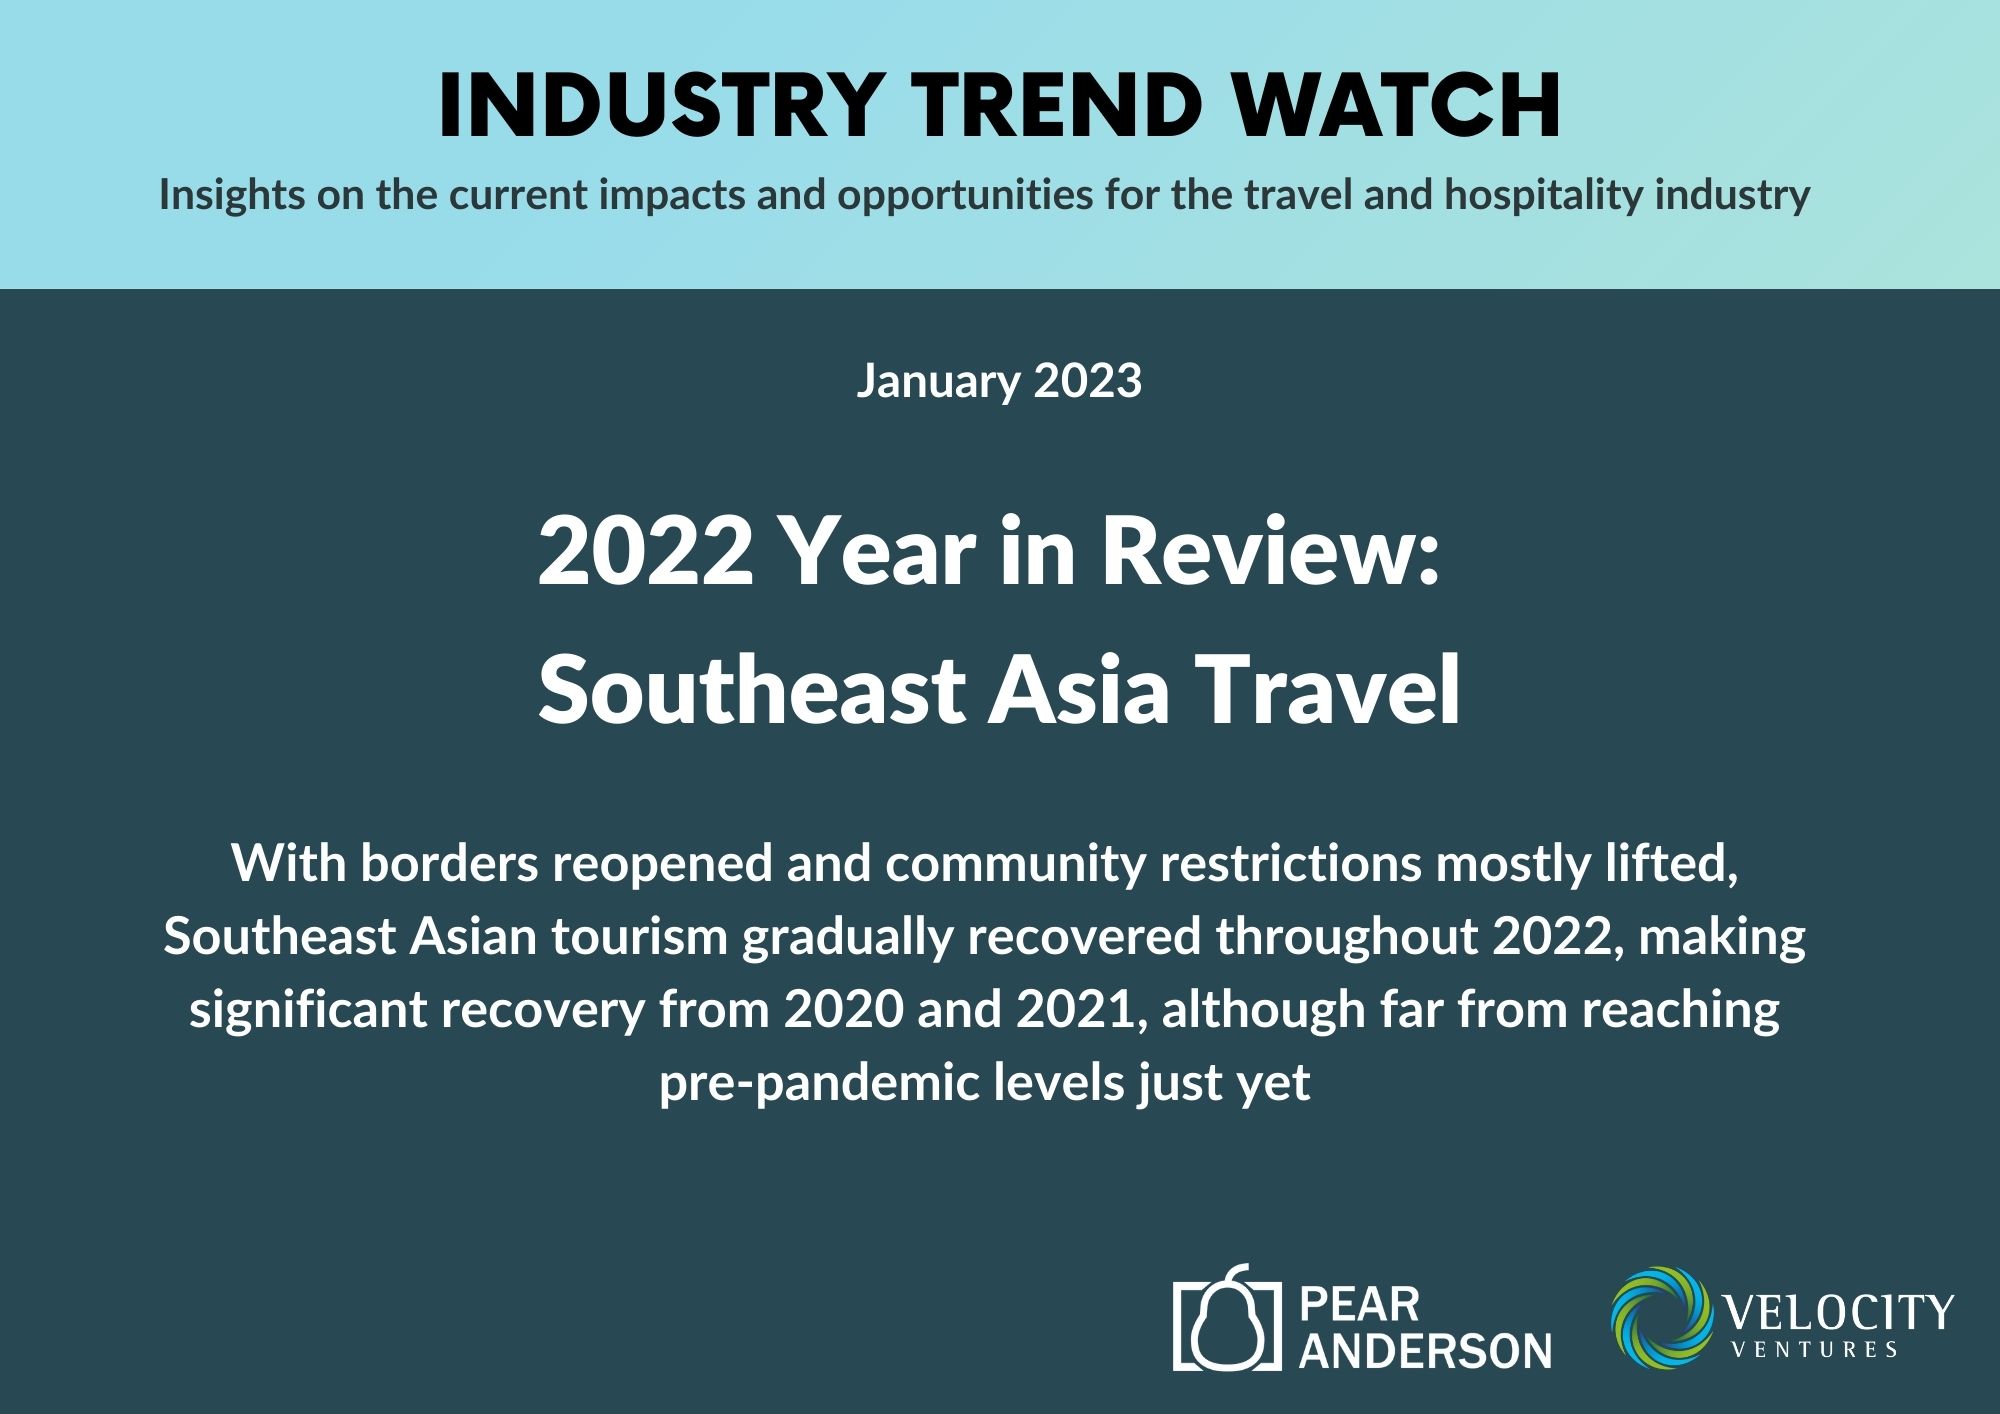 Southeast Asia Travel 2022 Year in Review